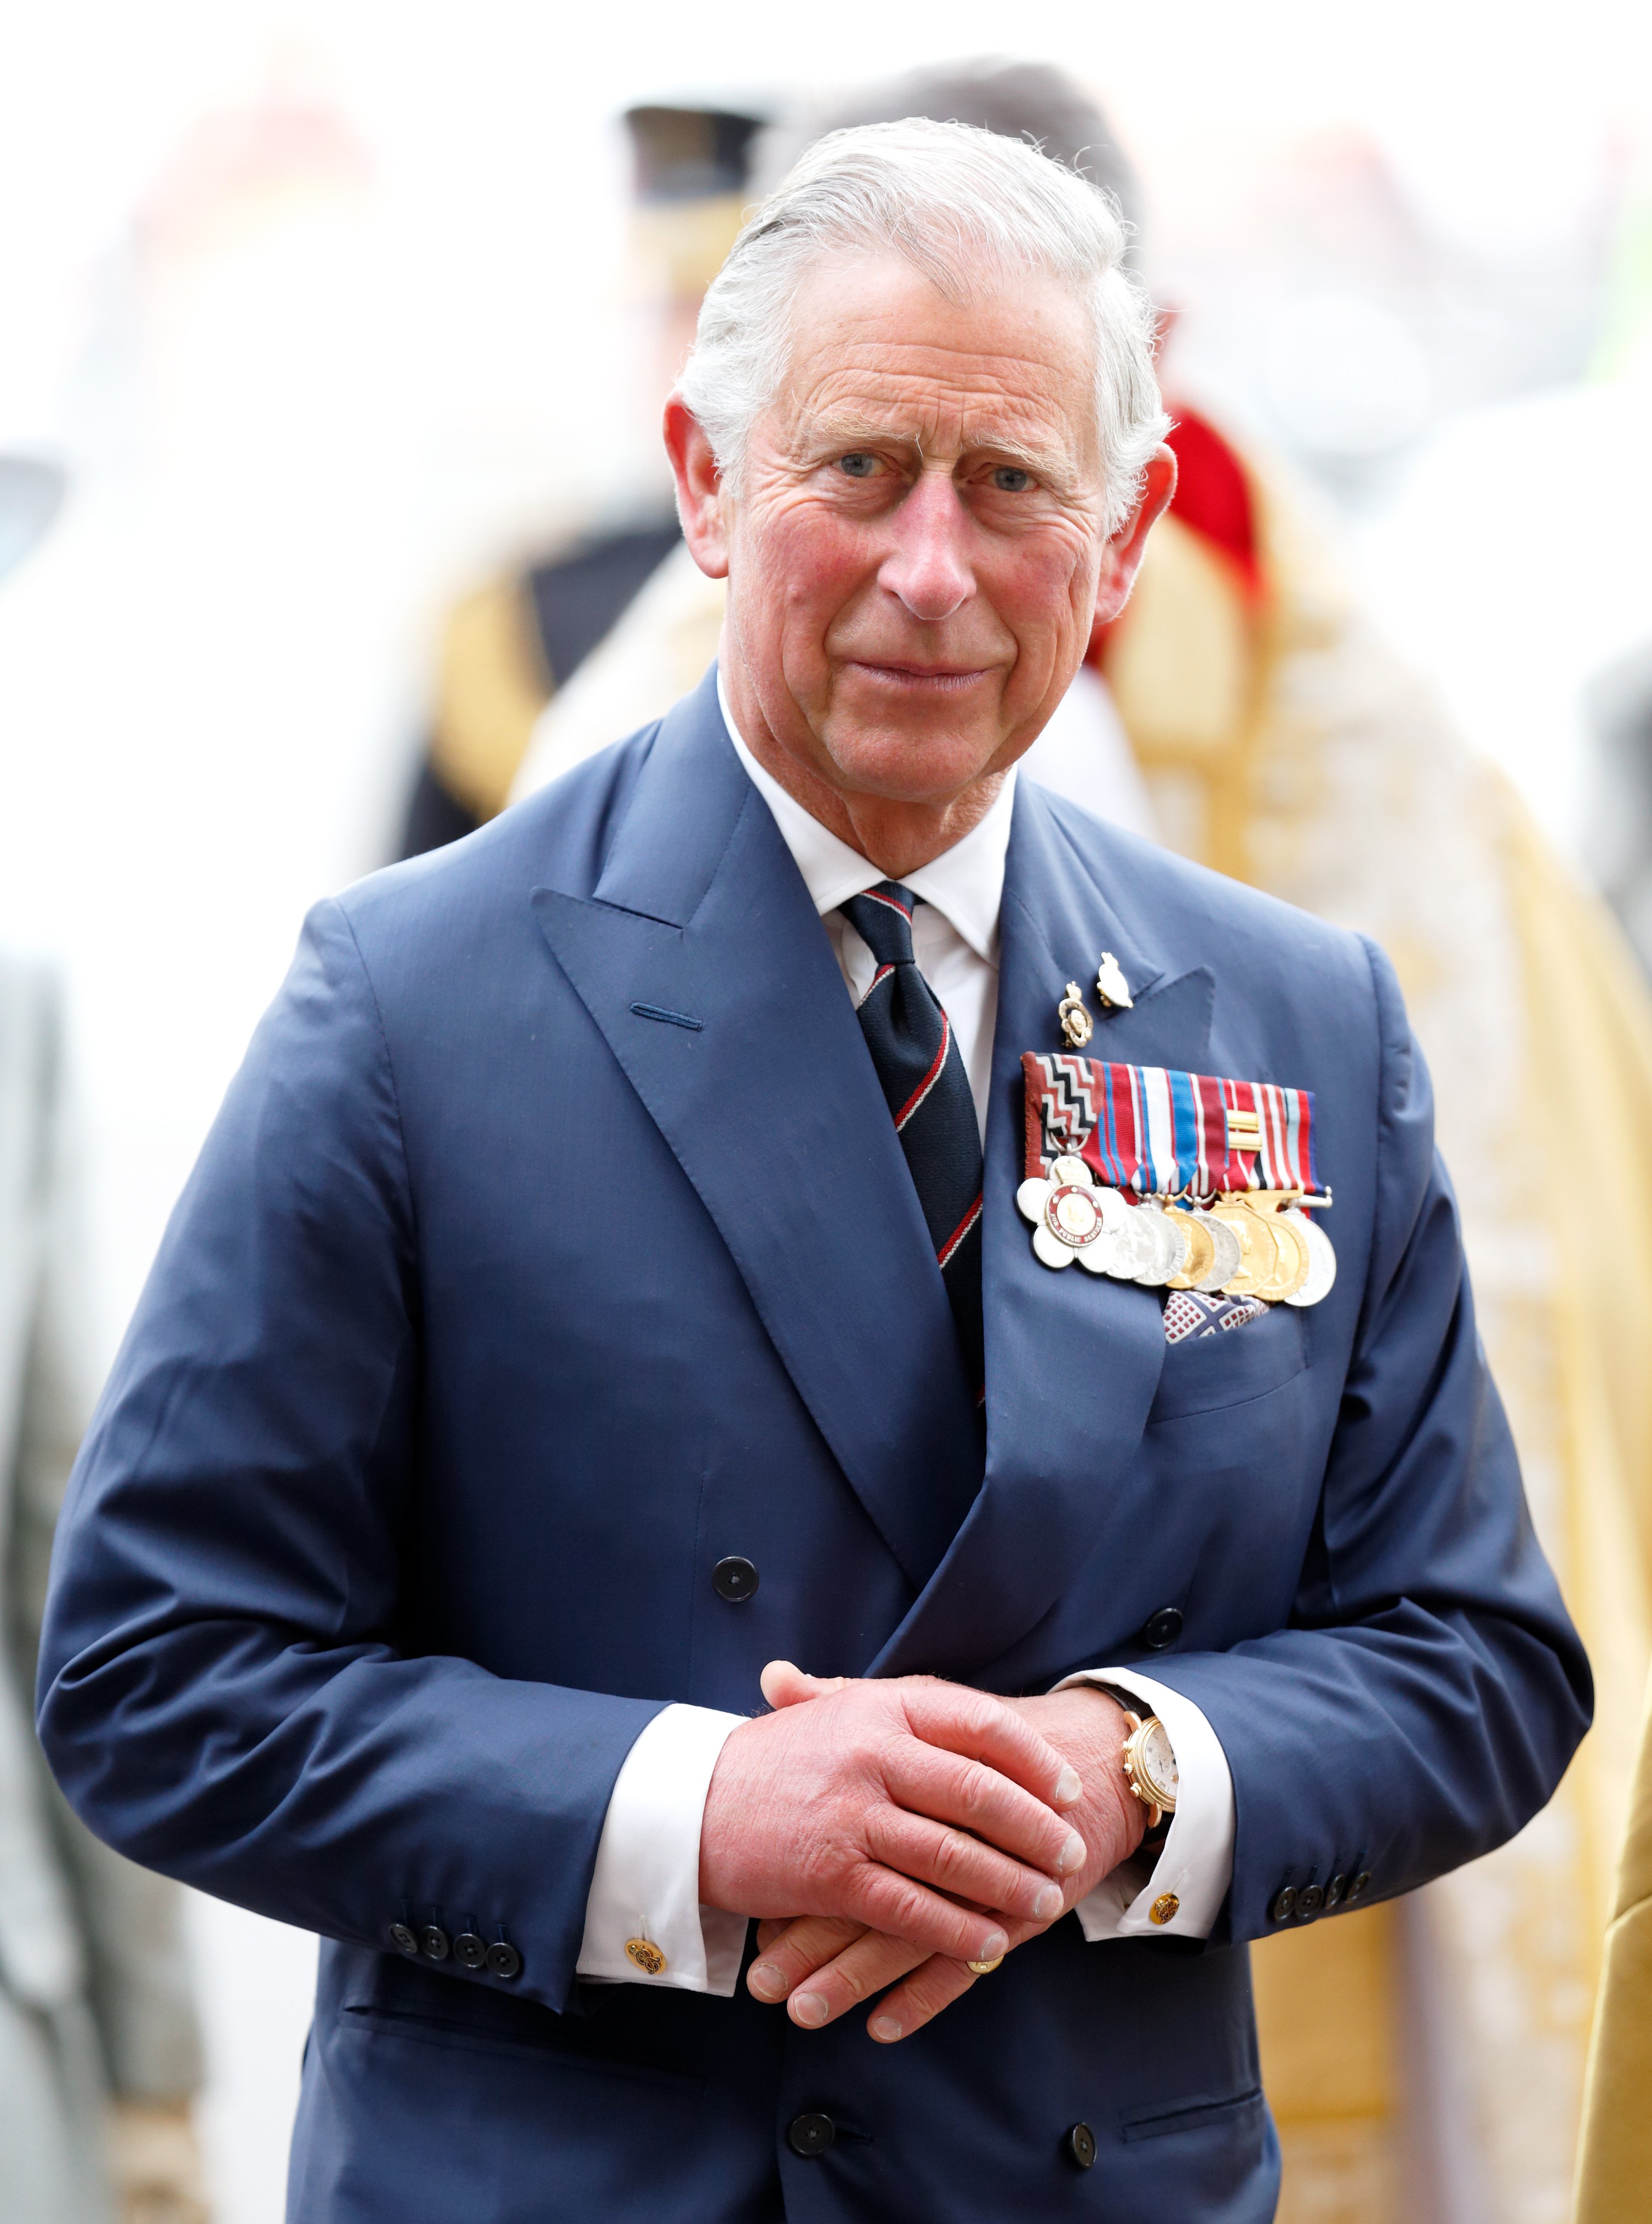 Prince Charles pictured at a Service of Thanksgiving to mark the 70th Anniversary of VE Day at Westminster Abbey, 2015, London, England. | Photo: Getty Images